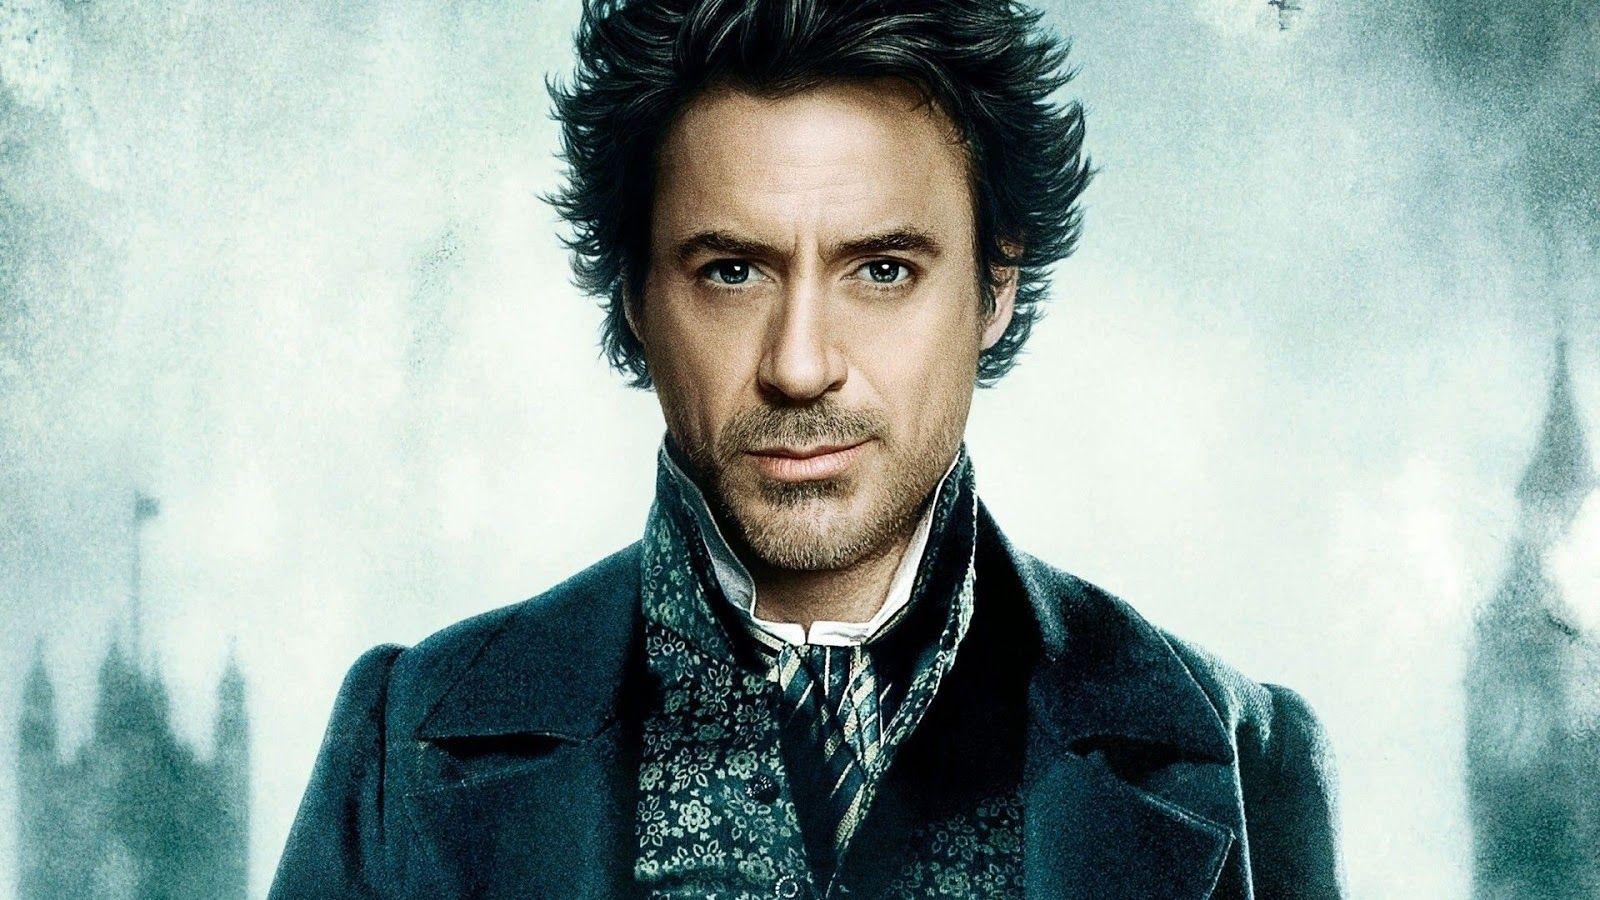 Robert Downey Jr. All Upcoming Movies List 2017 With Release